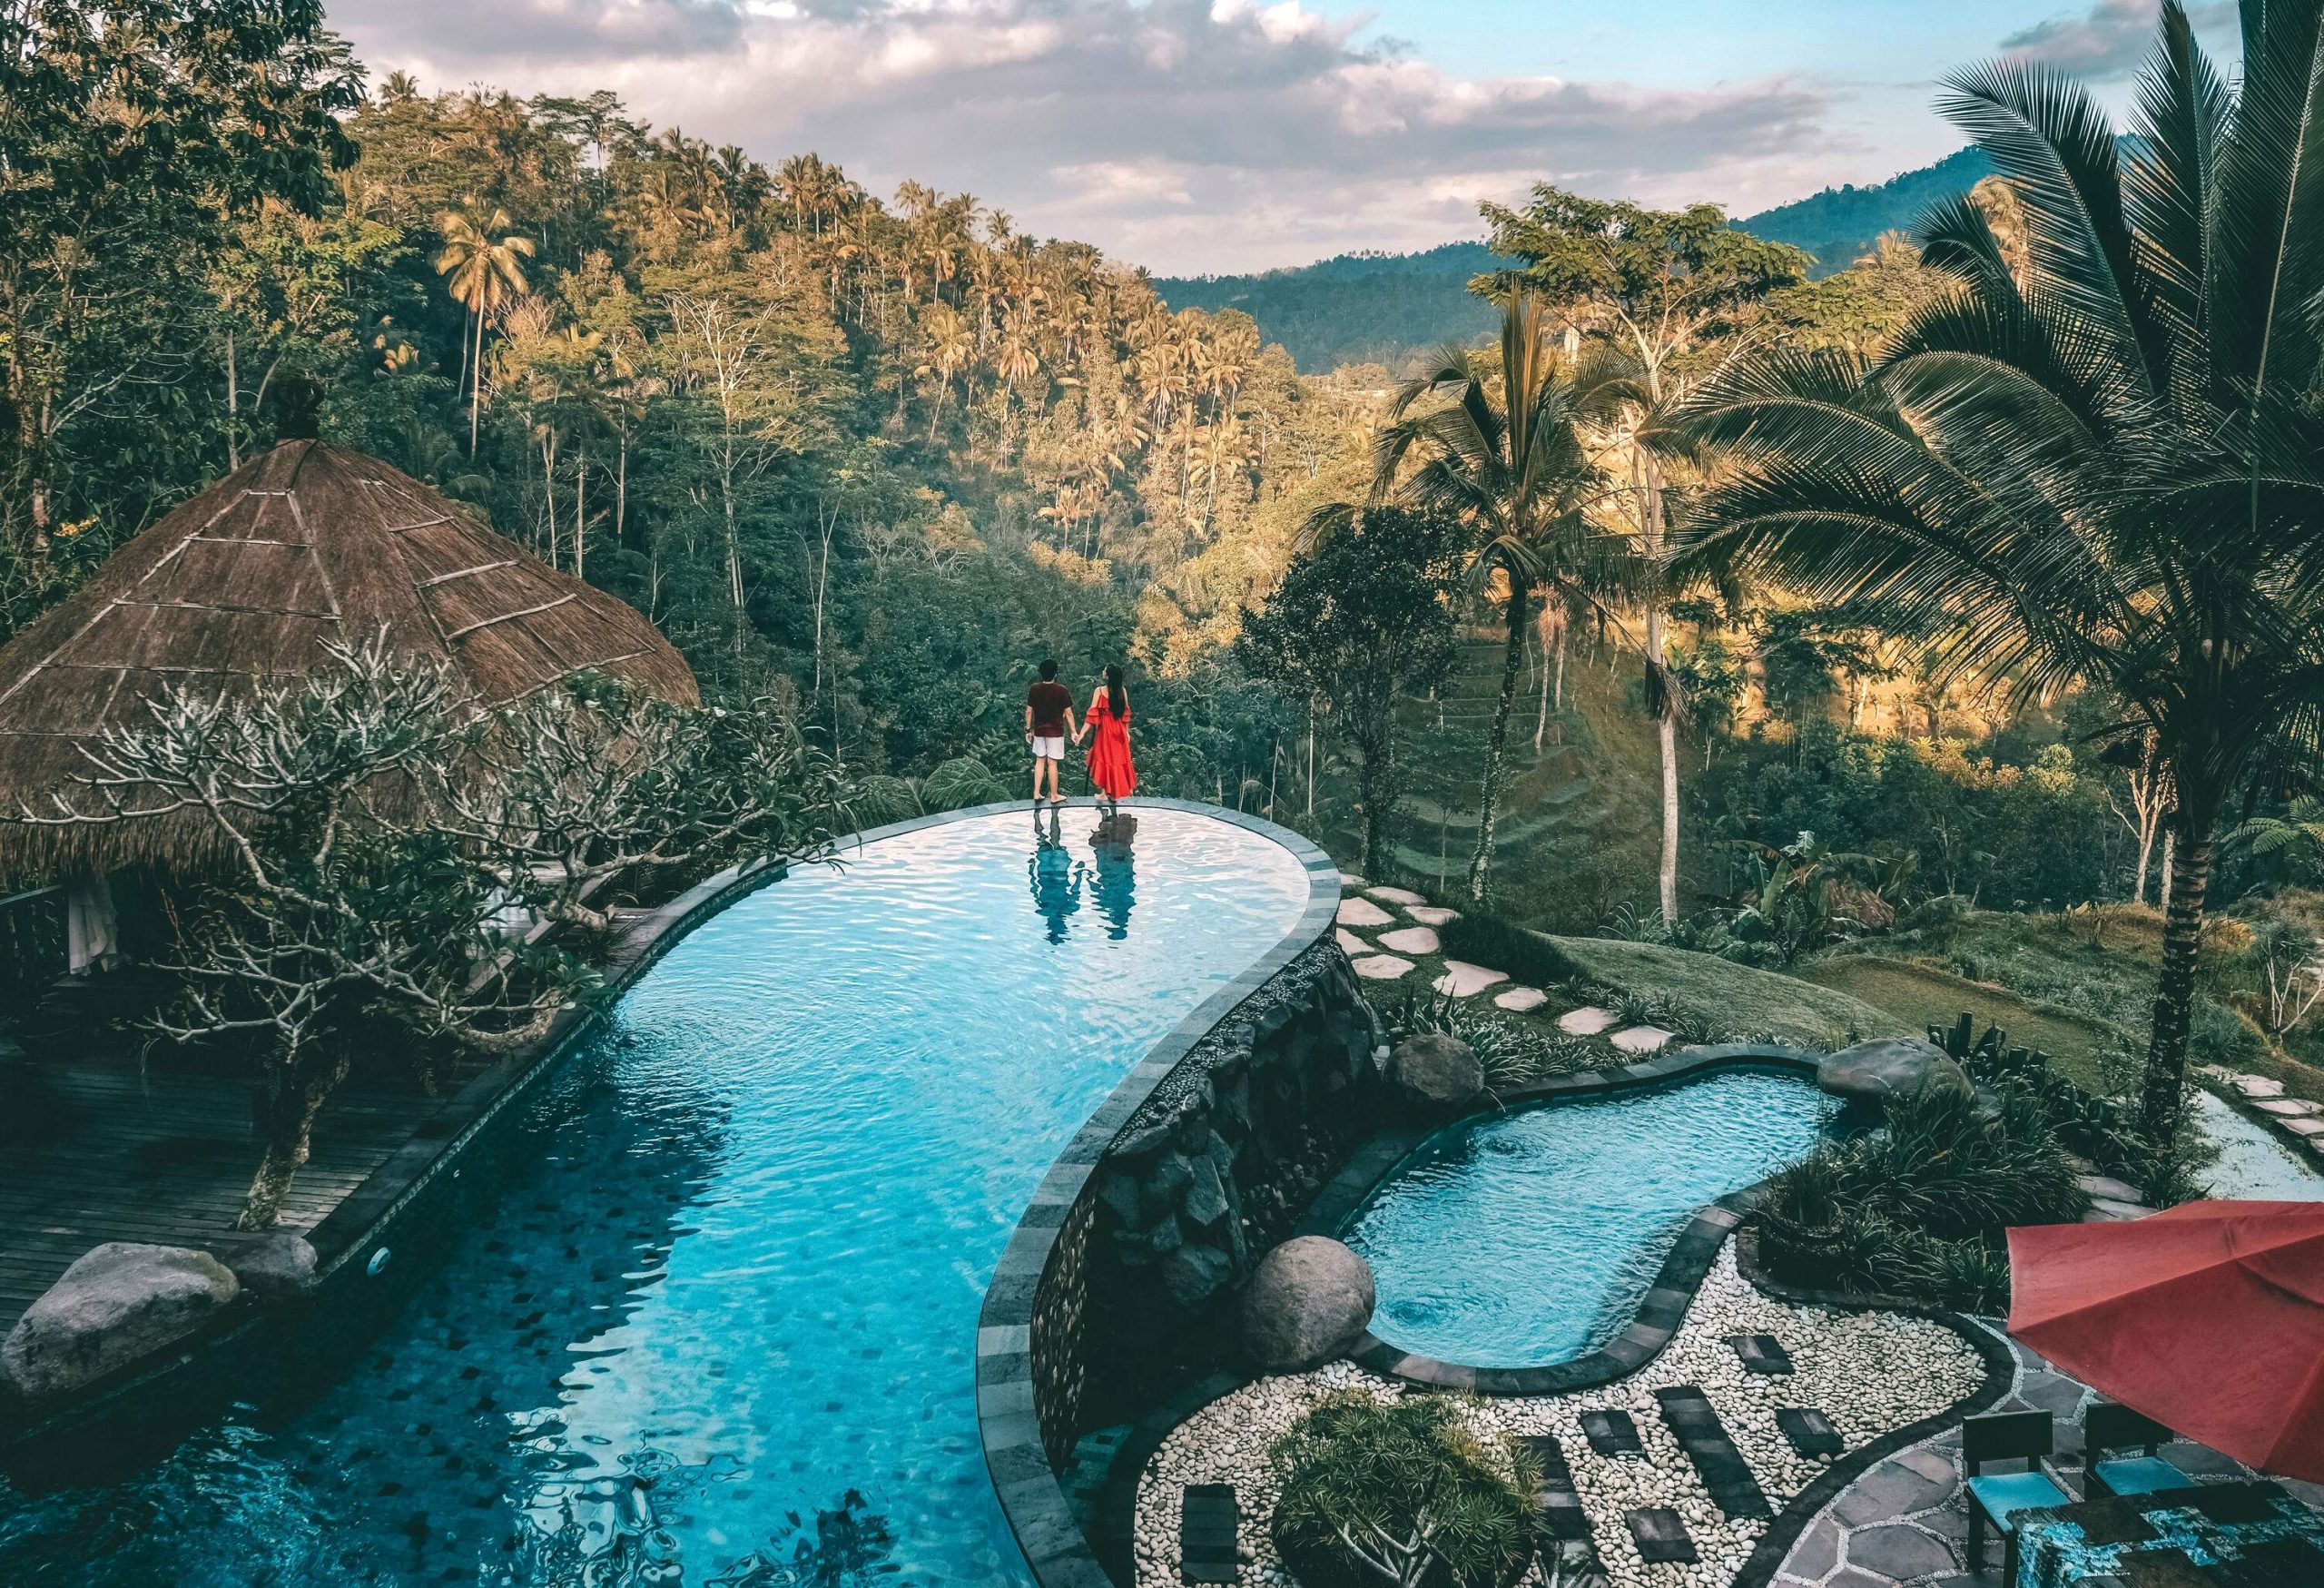 Two people hold hands as they stand at the edge of a luxury resort pool overlooking a lush forest.